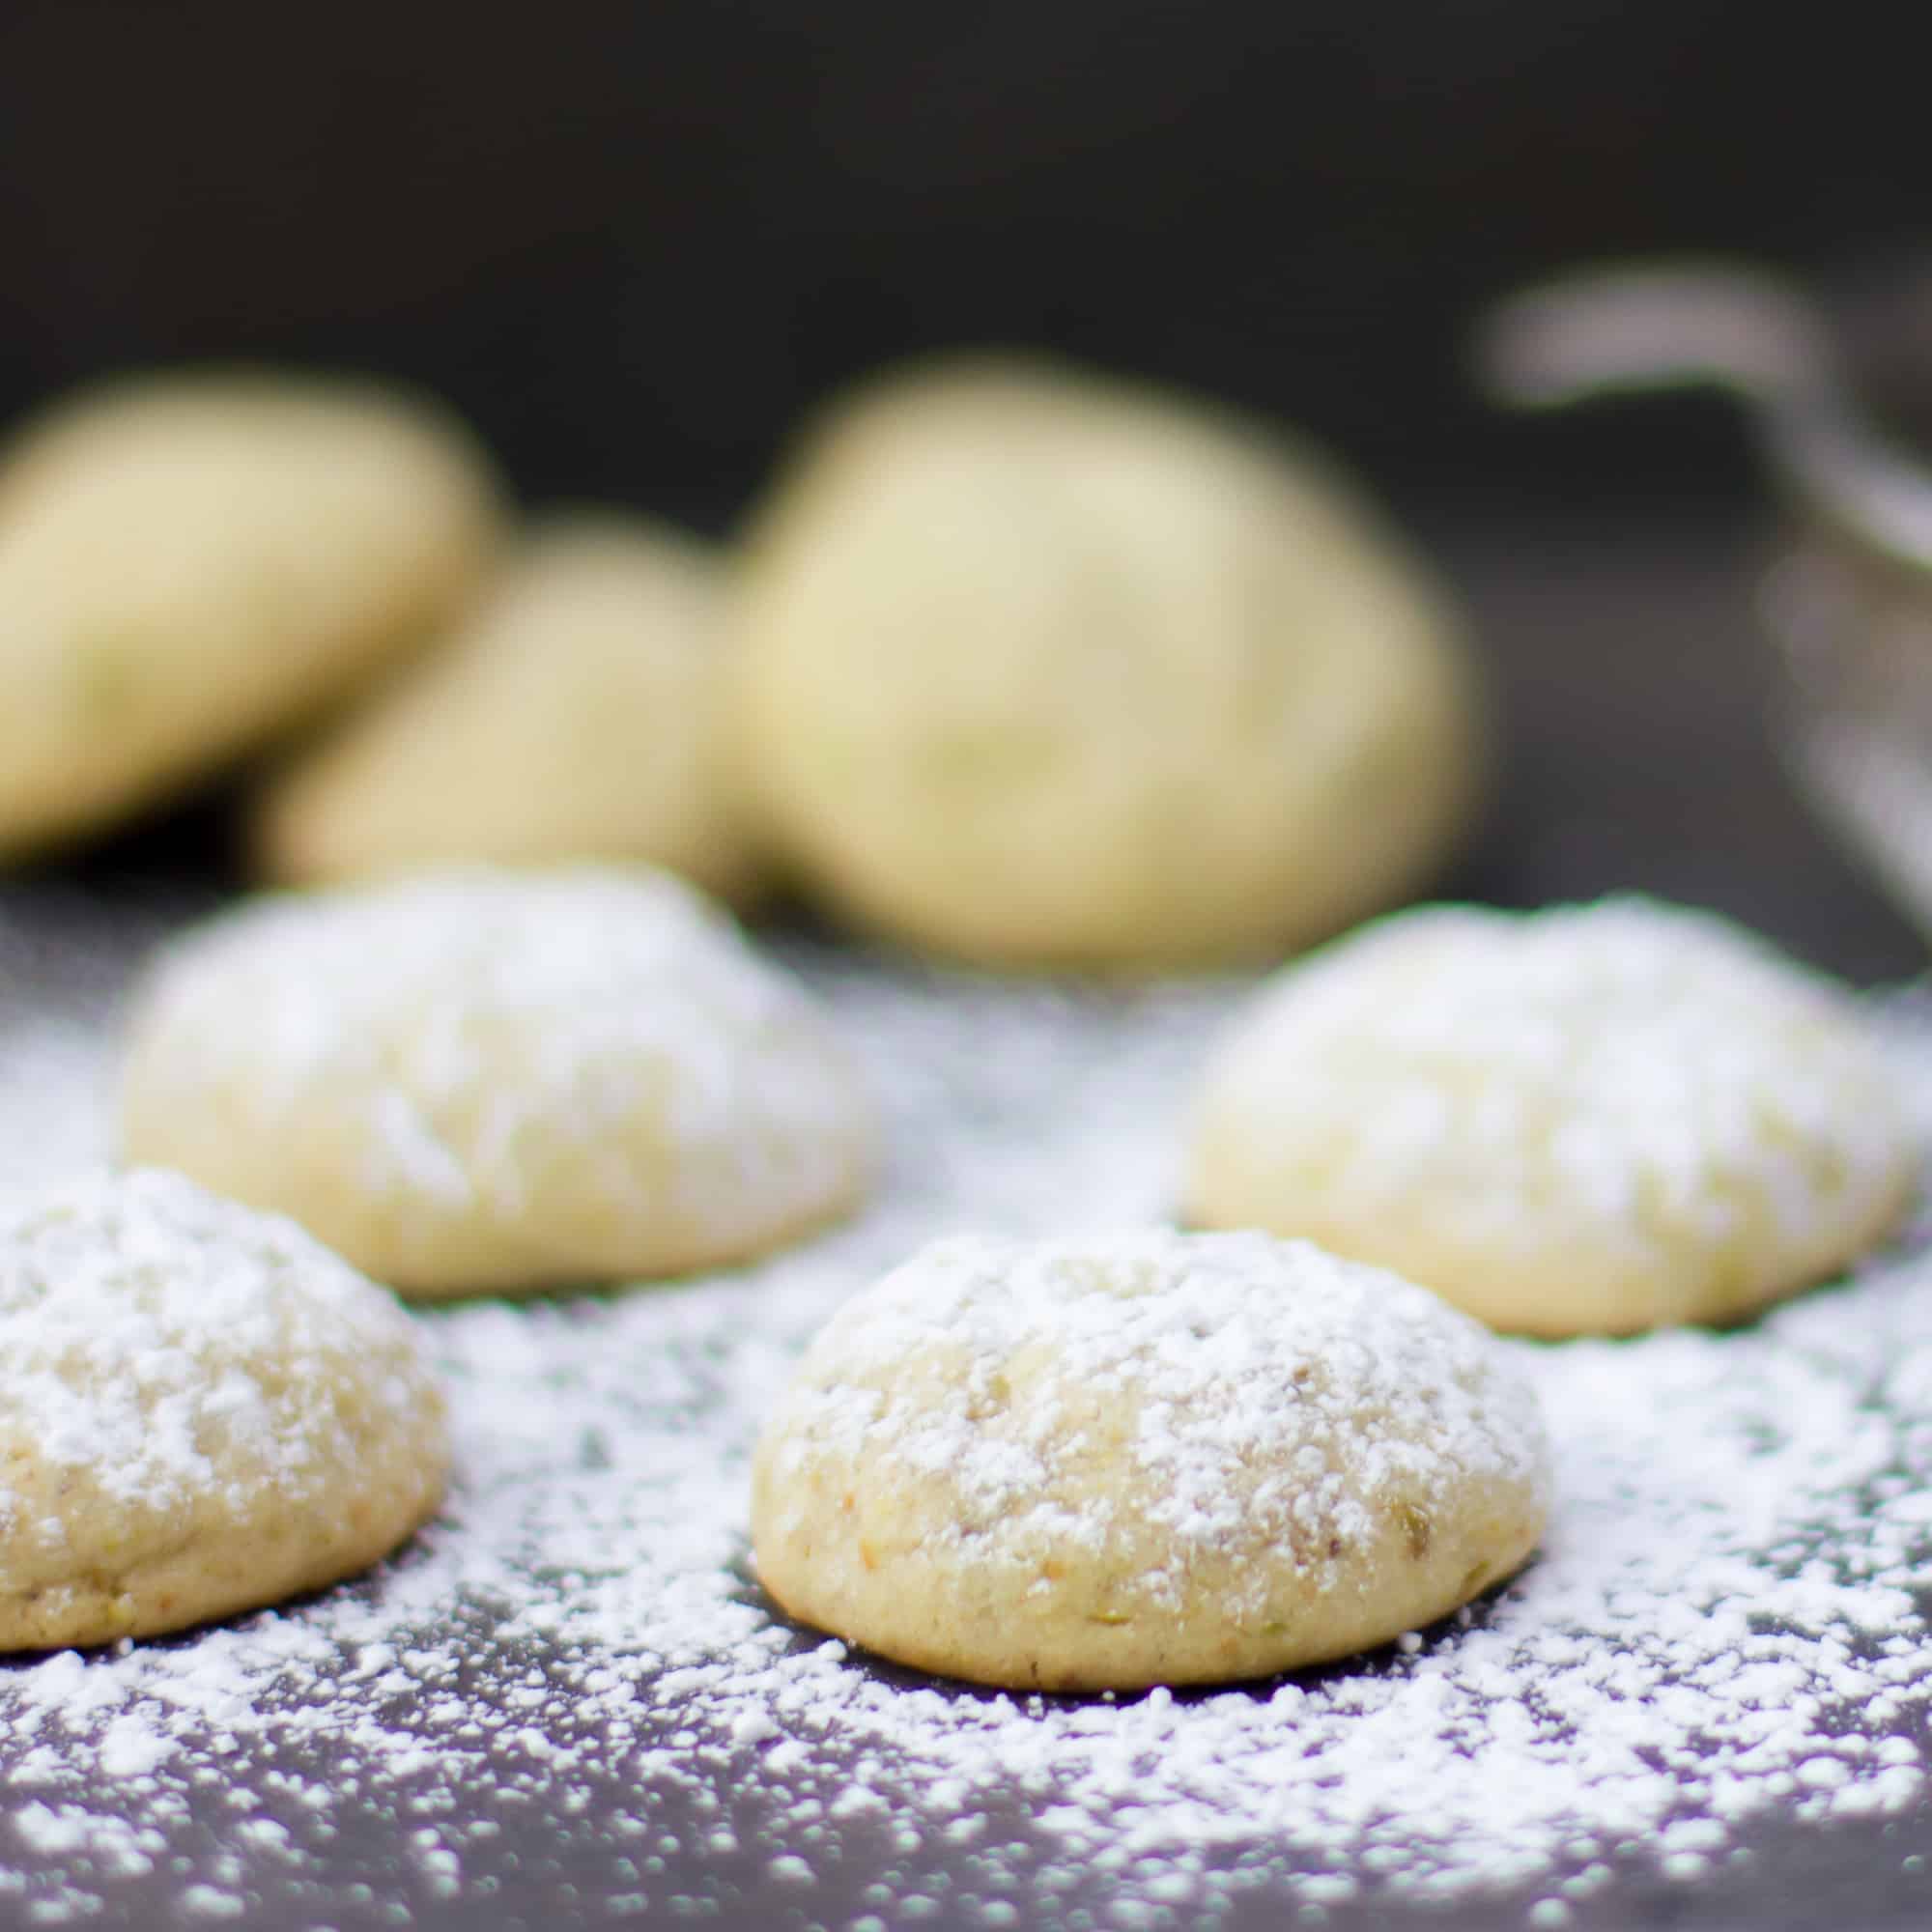 Similar to Mexican wedding cookies, these are light, crumbly and melt in your mouth. The pistachios give the cookie a nutty flavour and a light green colour and the cardamom provides a mild spicy flavour.